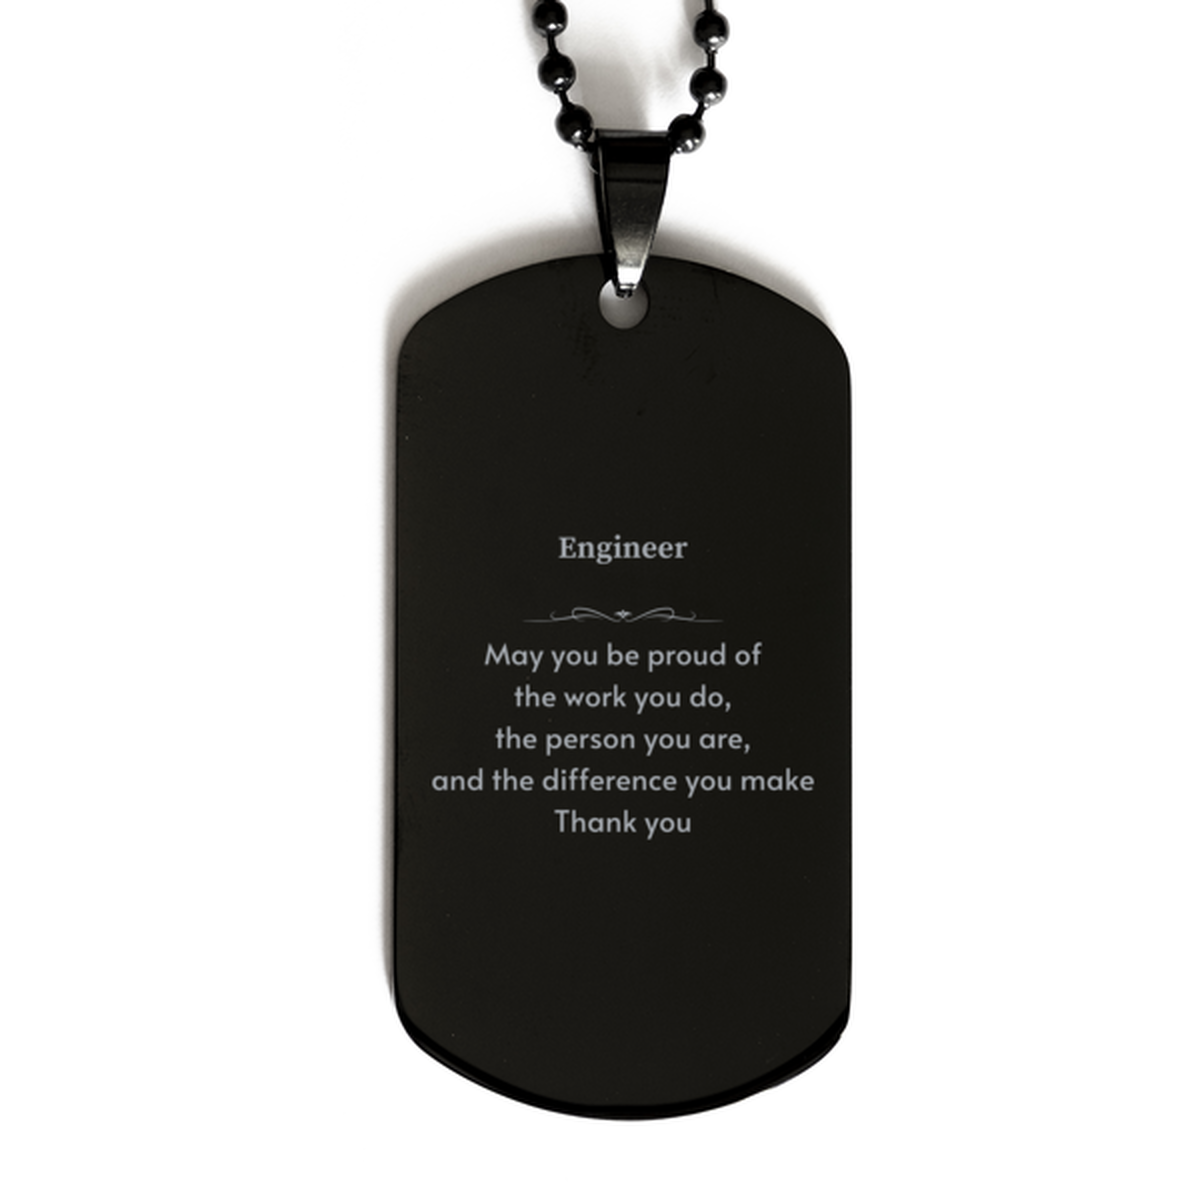 Heartwarming Black Dog Tag Retirement Coworkers Gifts for Engineer, Engineer May You be proud of the work you do, the person you are Gifts for Boss Men Women Friends